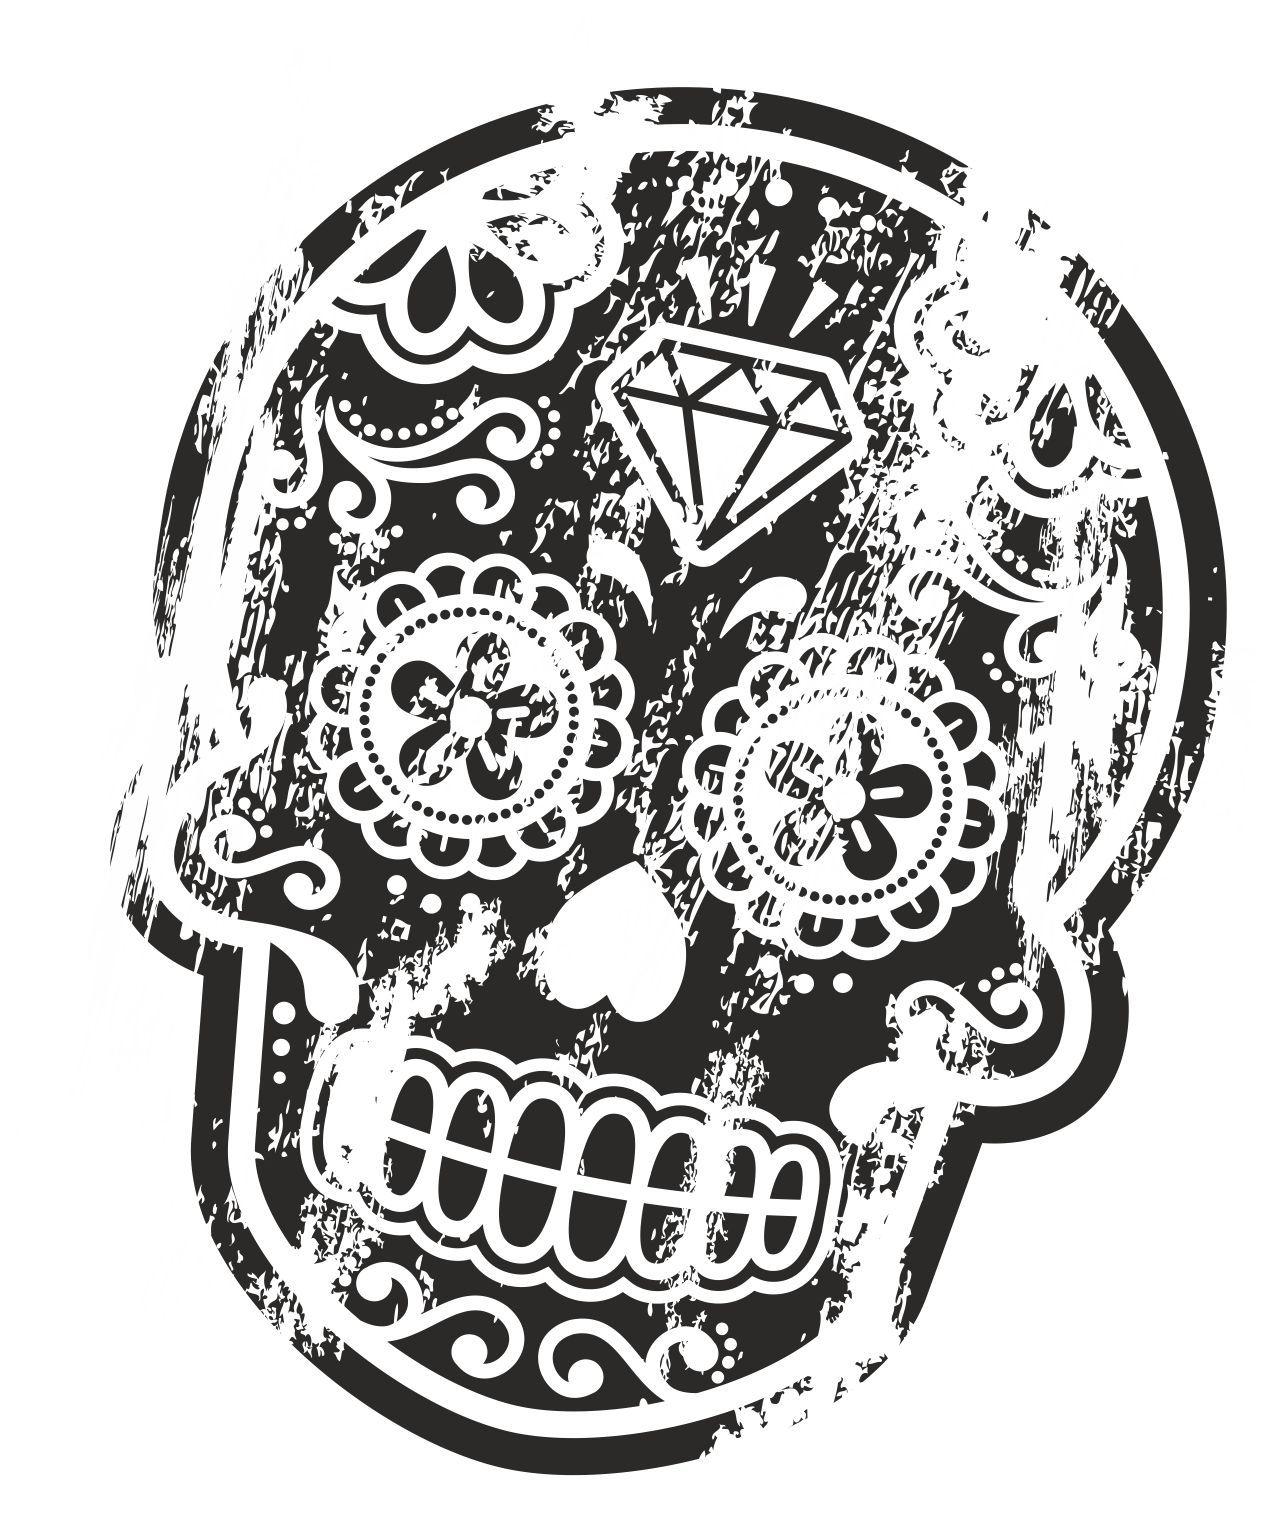 Skull Black and White Logo - Distressed Aged Mexican Day Of The Dead SUGAR SKULL Black & White External  Vinyl Car Sticker 120x90mm